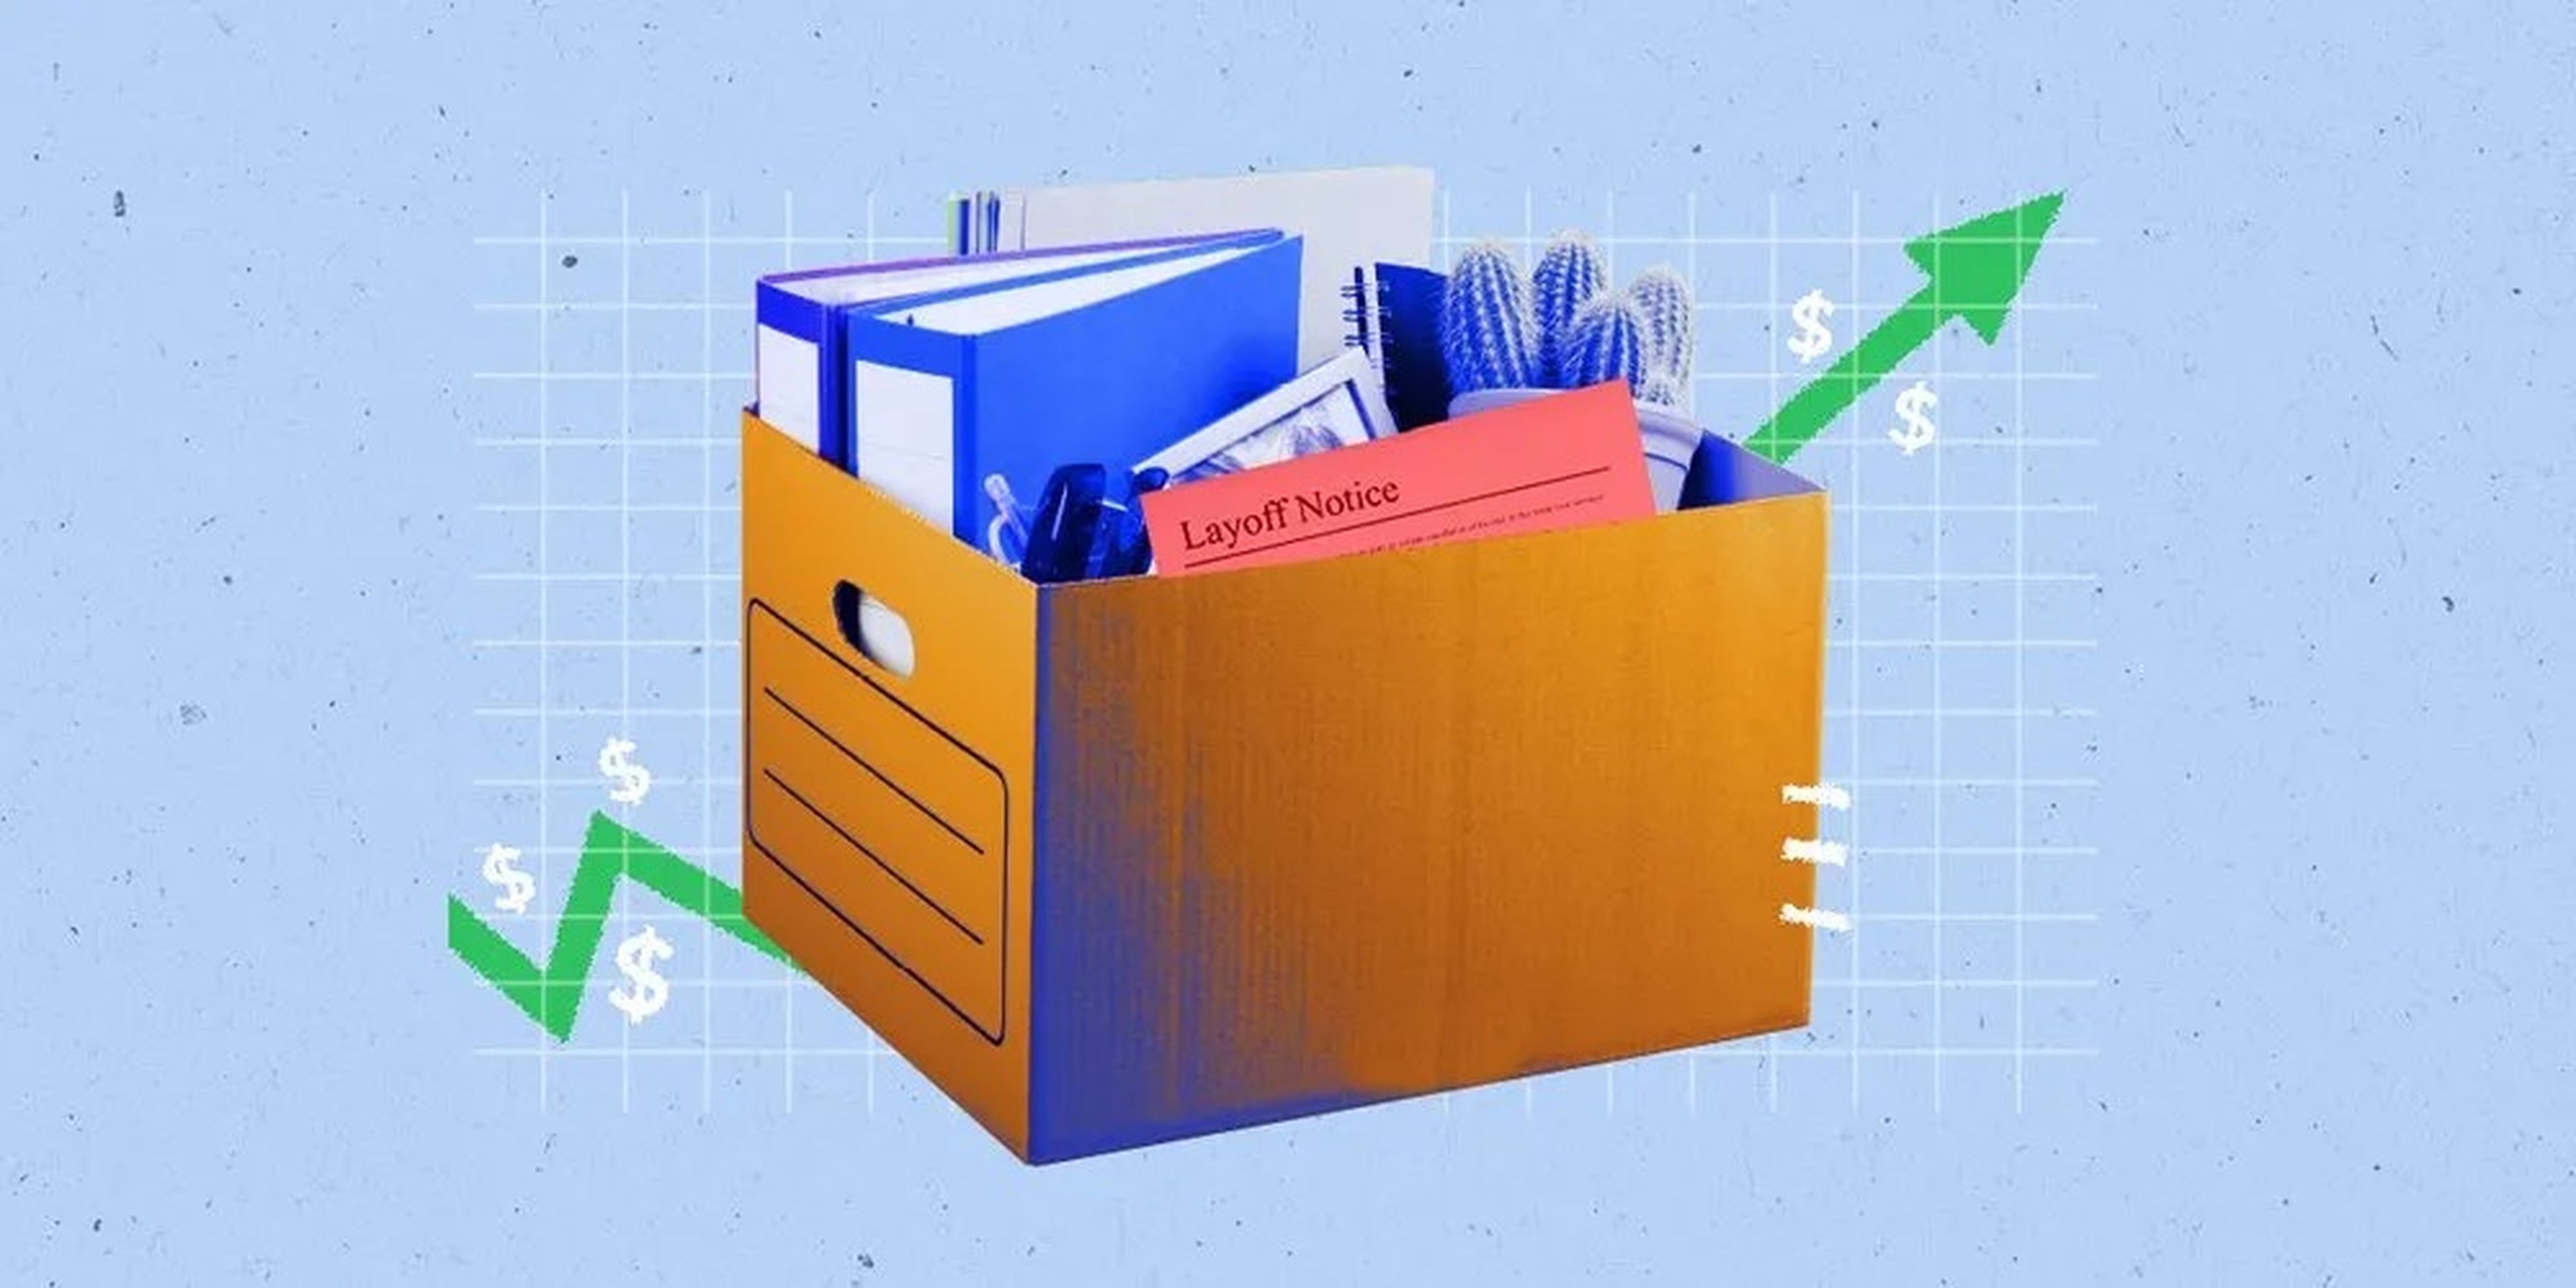 A graphic of a cardboard box filled with office supplies, a symbol of being laid off.